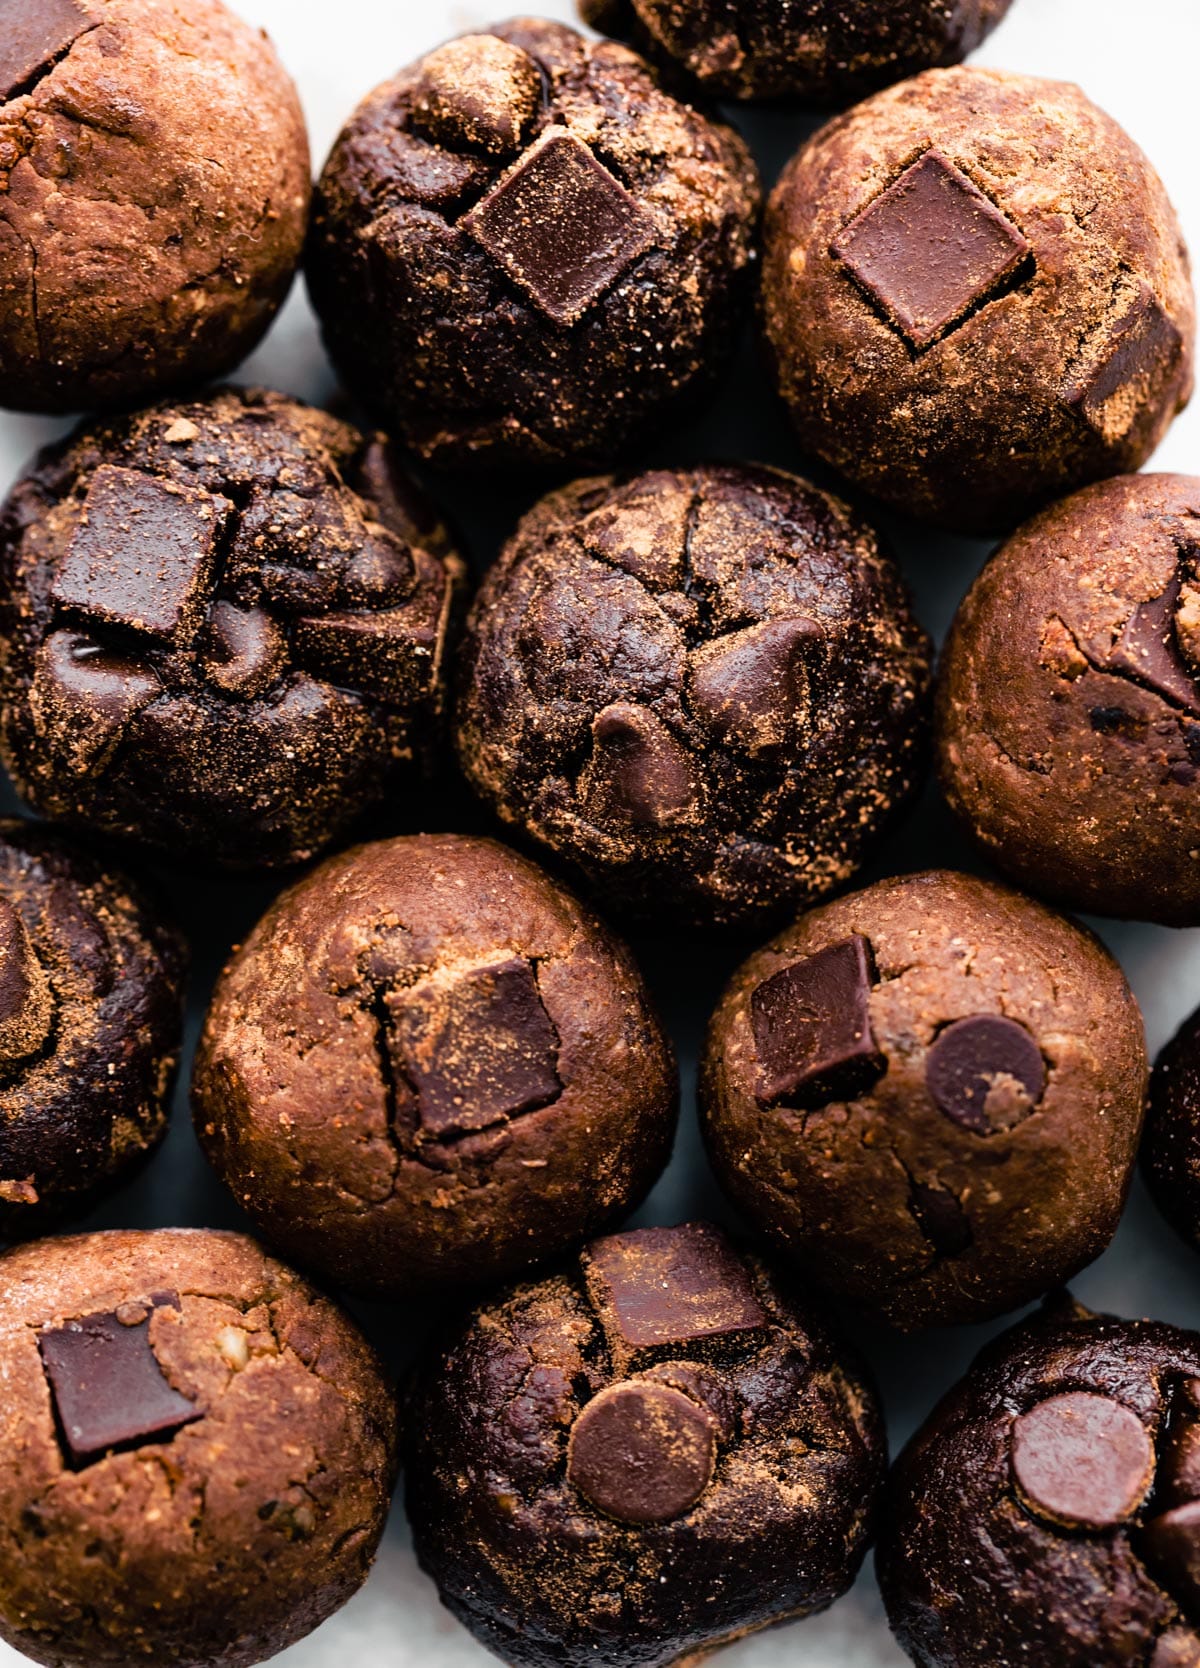 Close up image of chocolate nut-free protein balls made with chocolate chips and chocolate chunks.